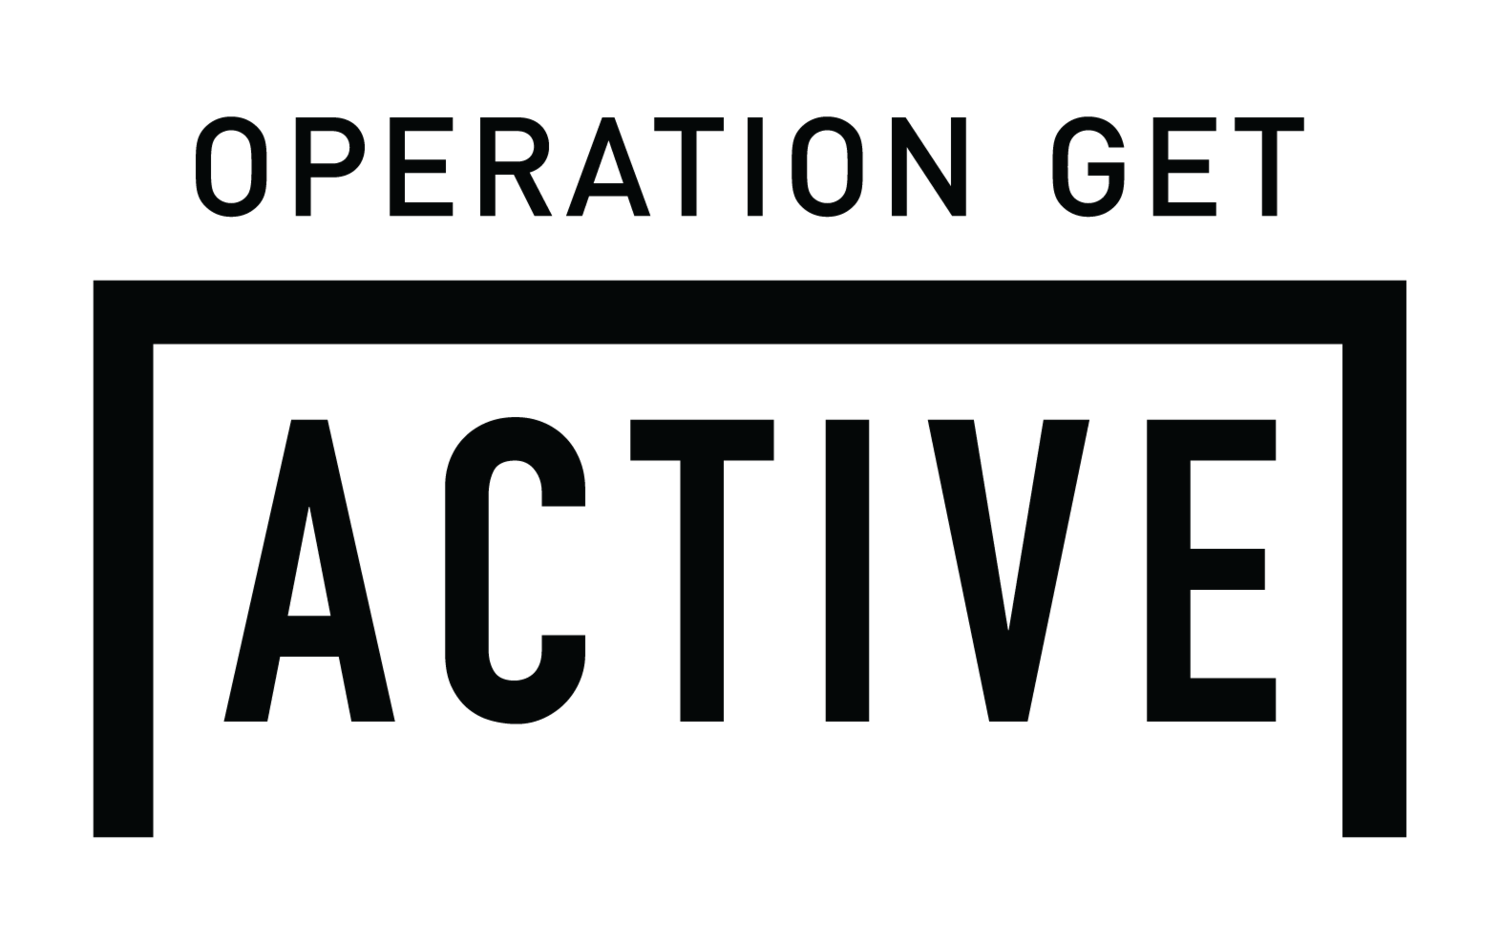 Operation Get Active